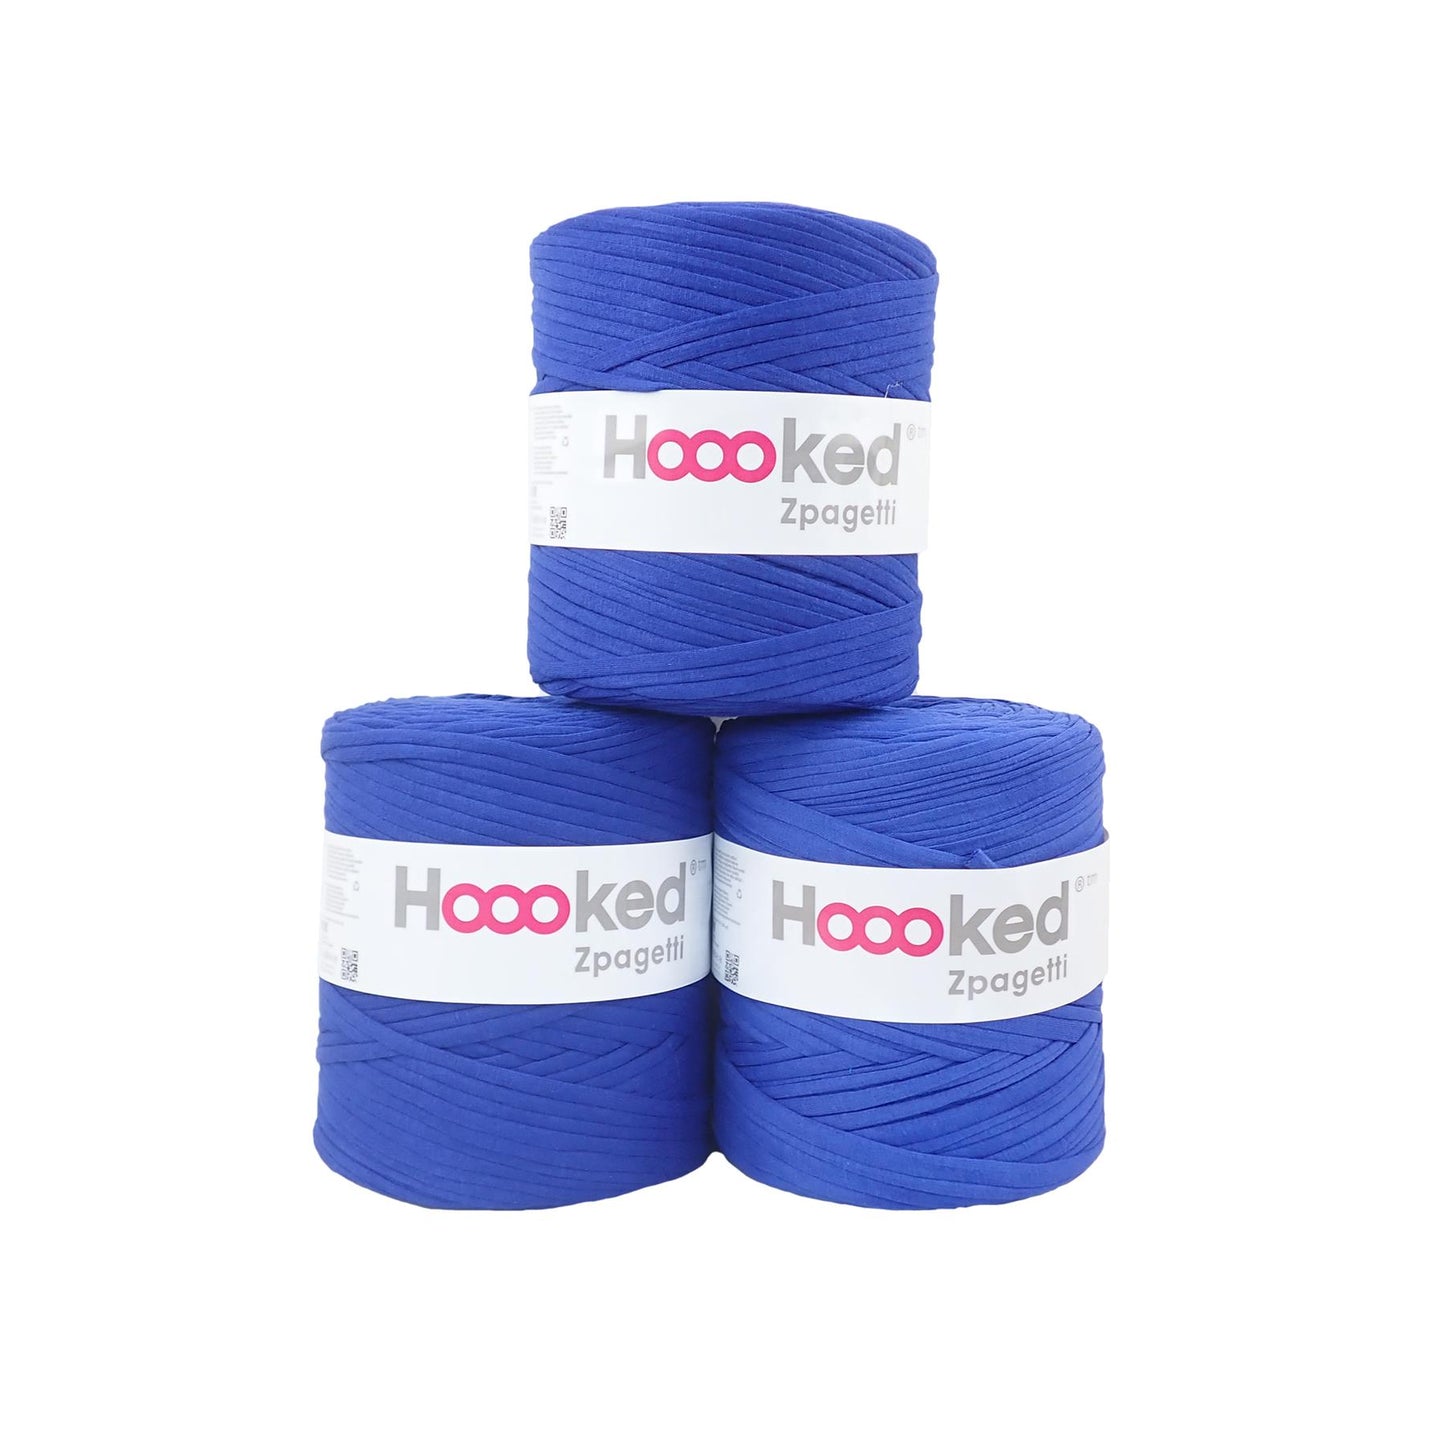 Hoooked Zpagetti Blue Cotton T-Shirt Yarn - 120M 700g (Pack of 3)